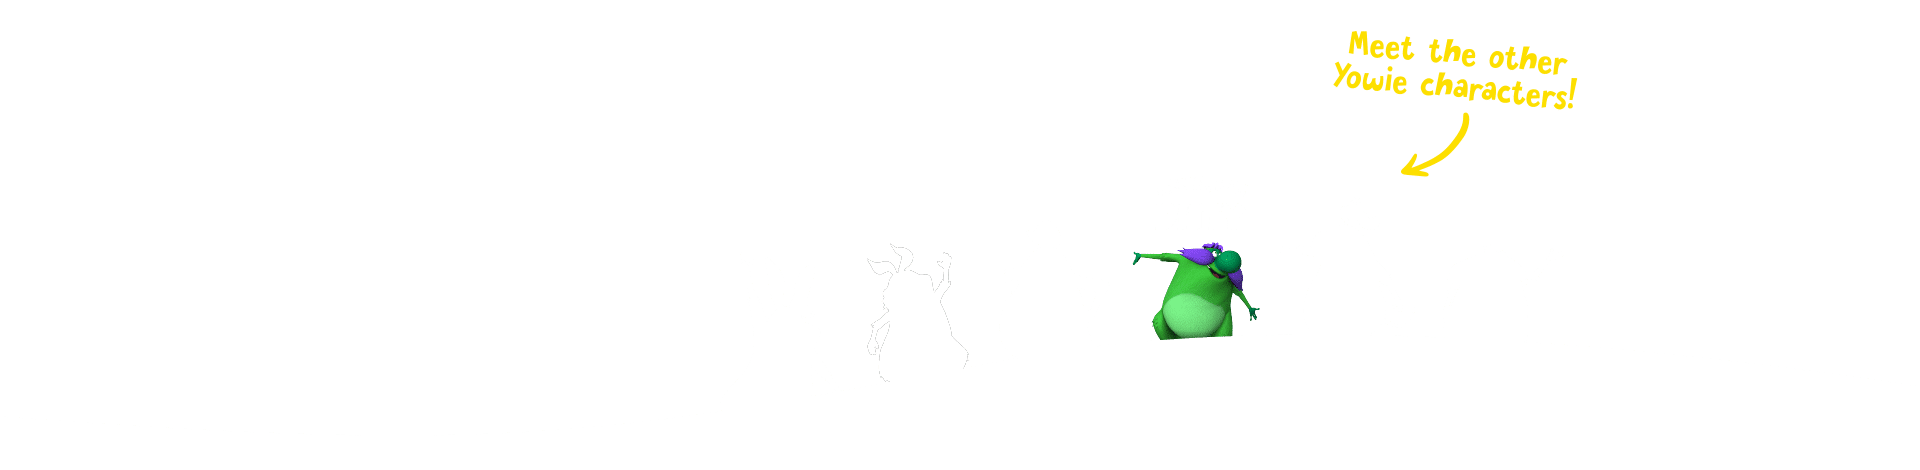 Ditty Silhouette Curve 01